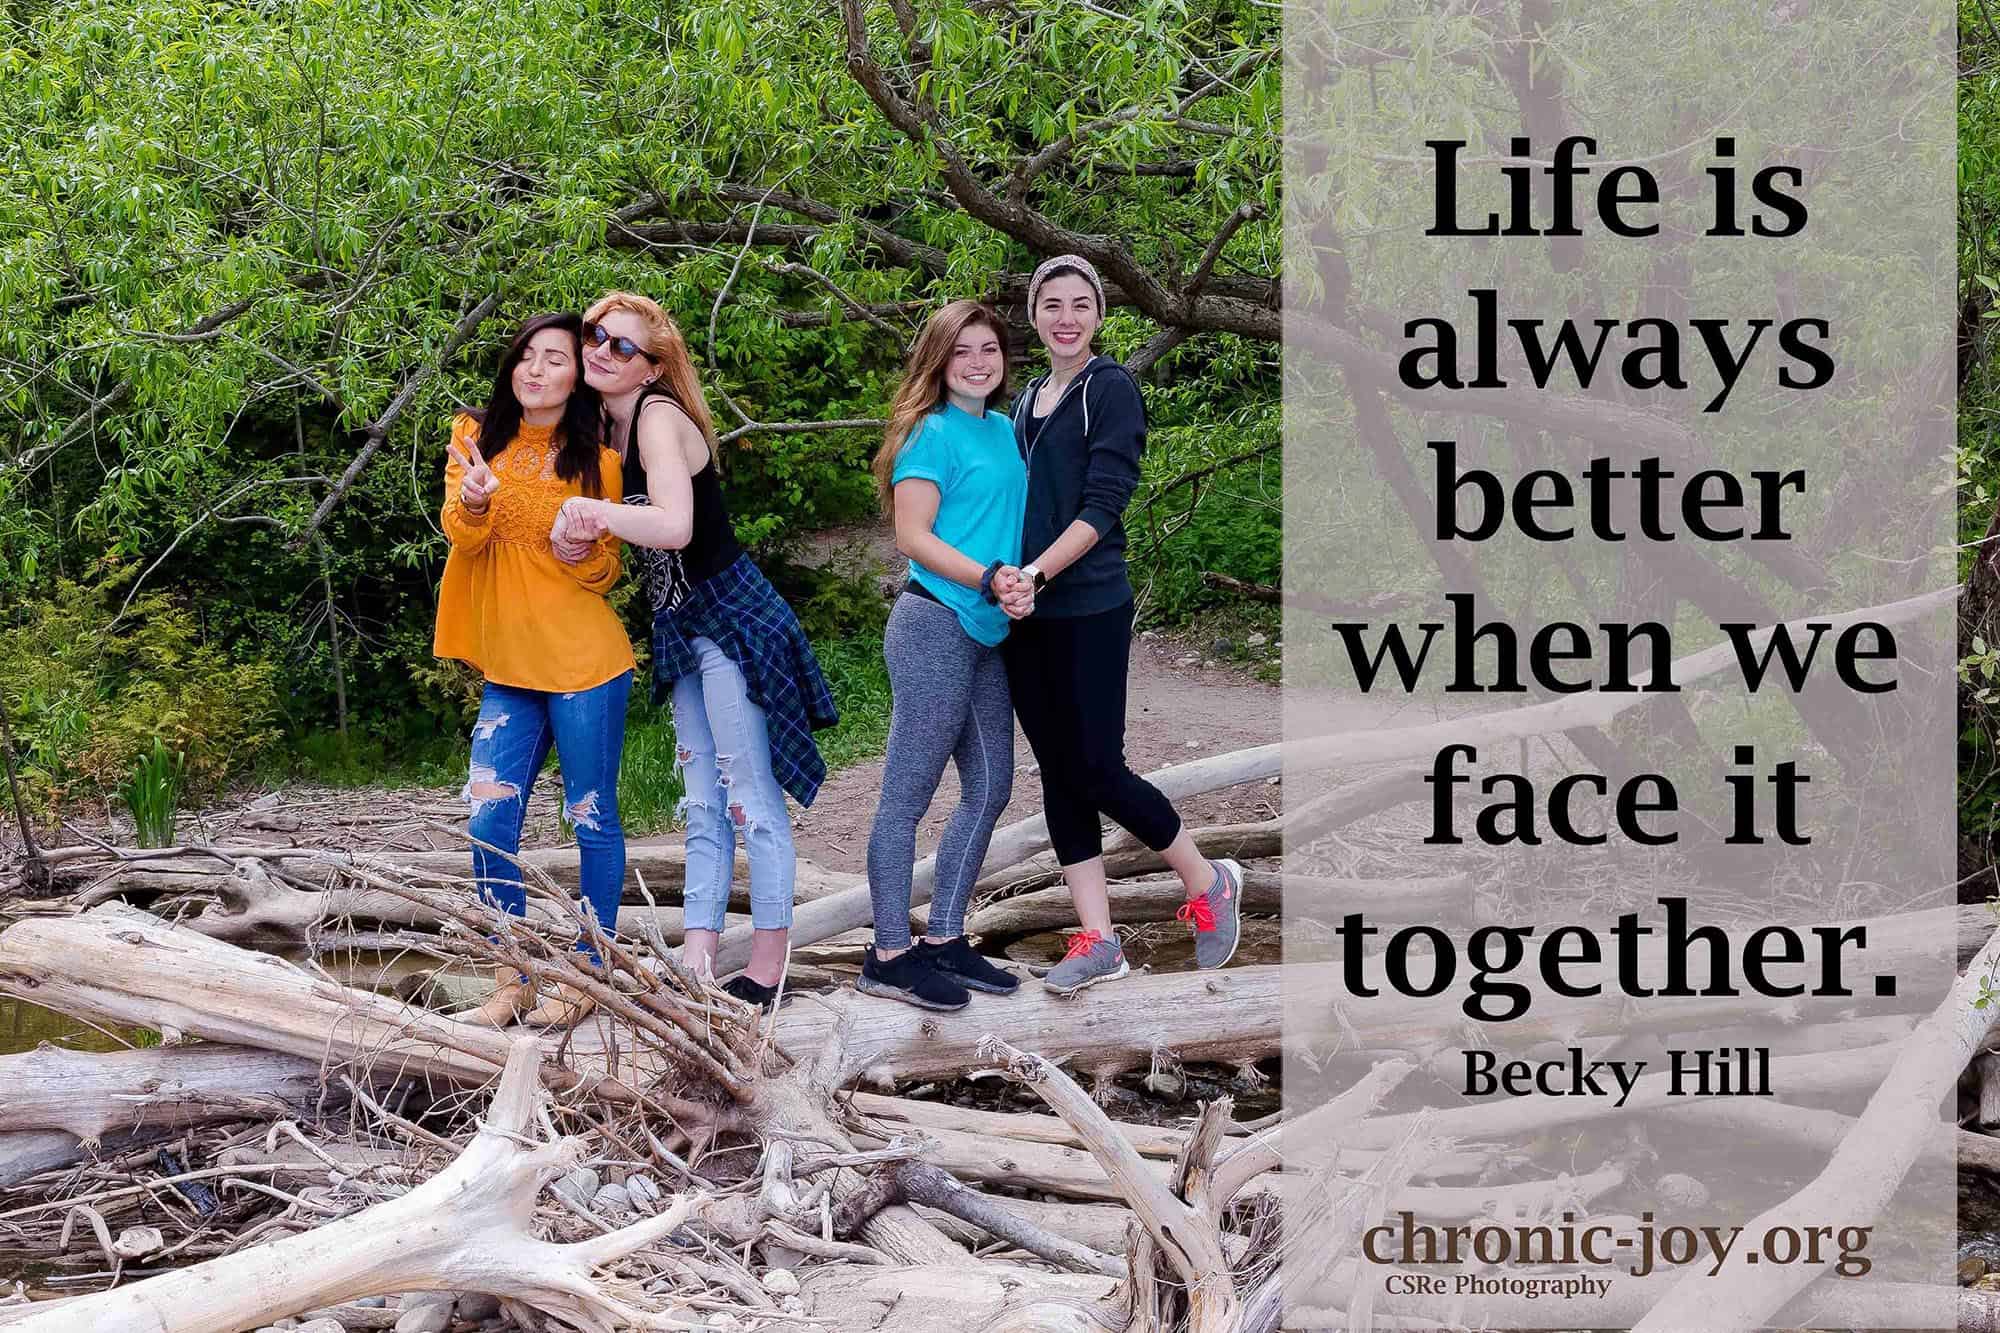 Life is always better when we face it together.